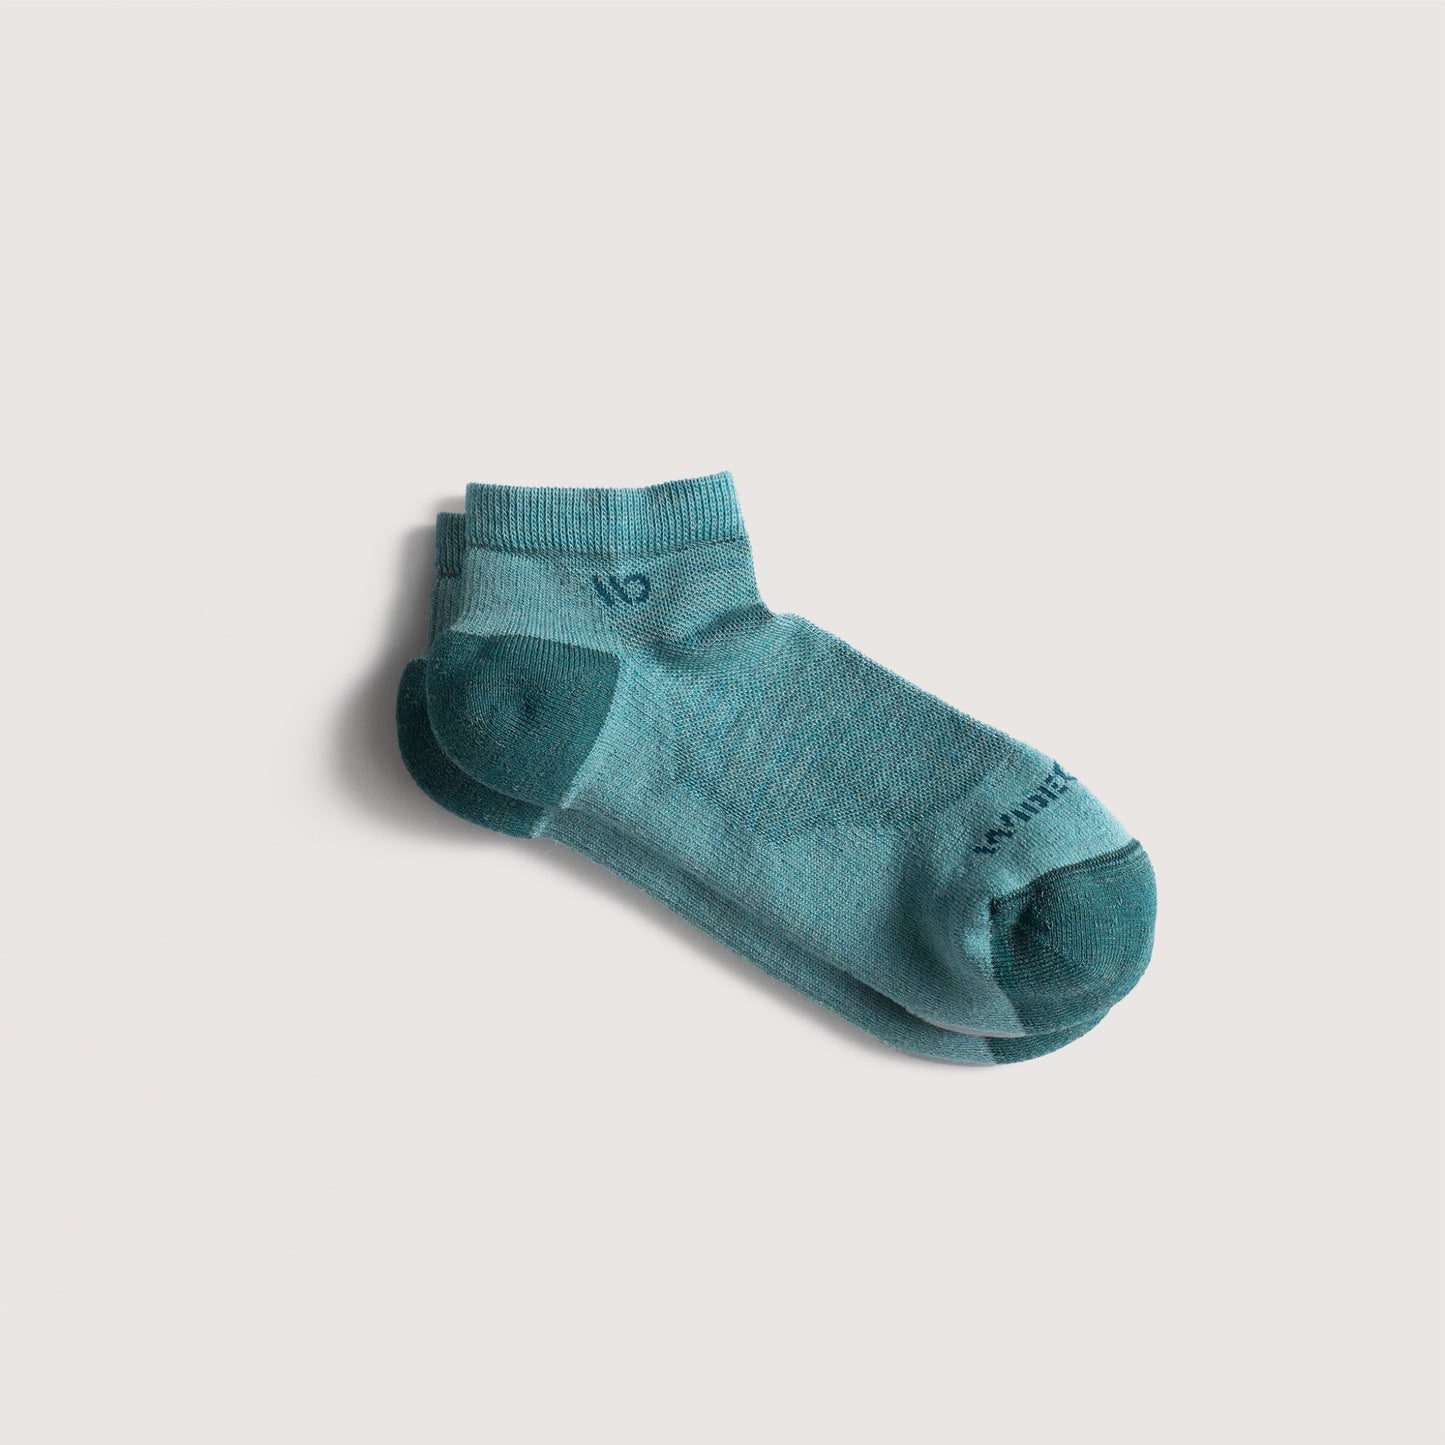 Flat socks featuring teal heel/toe and logo, with light teal body --Light Teal